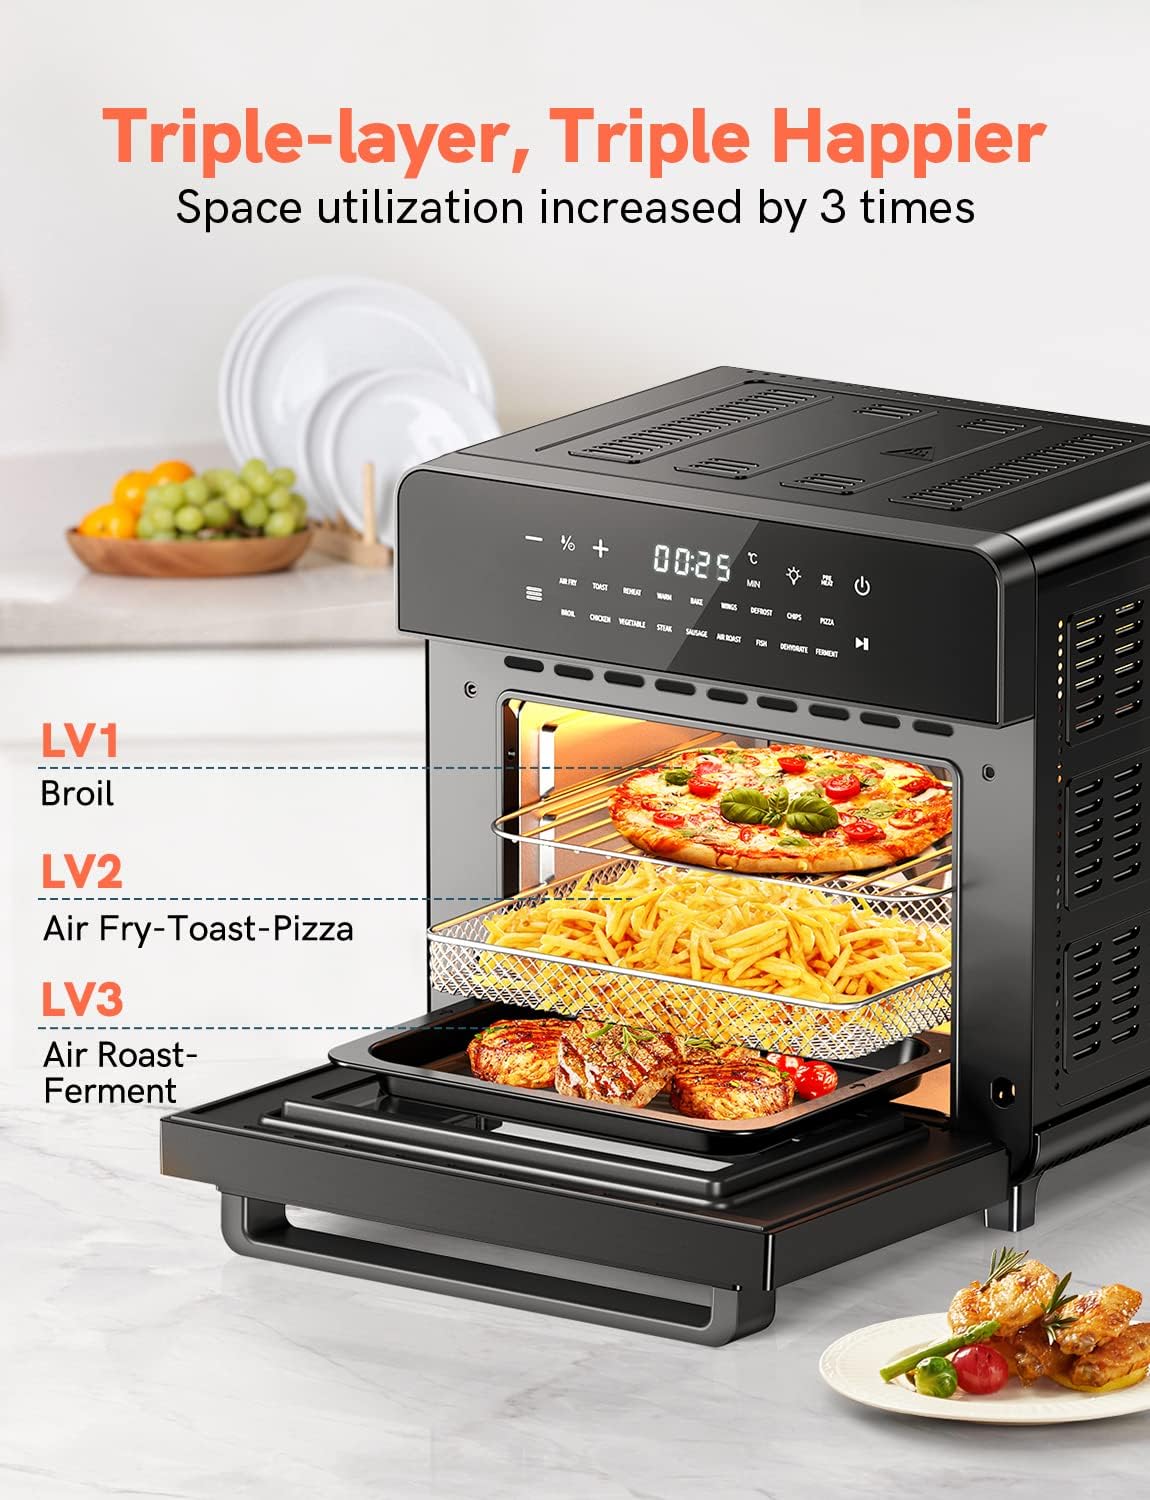 Involly 18 in 1 Air Fryer Oven, 15L Countertop Convection Mini Oven, Digital Table-top Air Fryers Toaster Oven, Compact Electric Pizza Oven, Roast, Bake, Grill and Dehydrate, Stainless Steel, 1600W